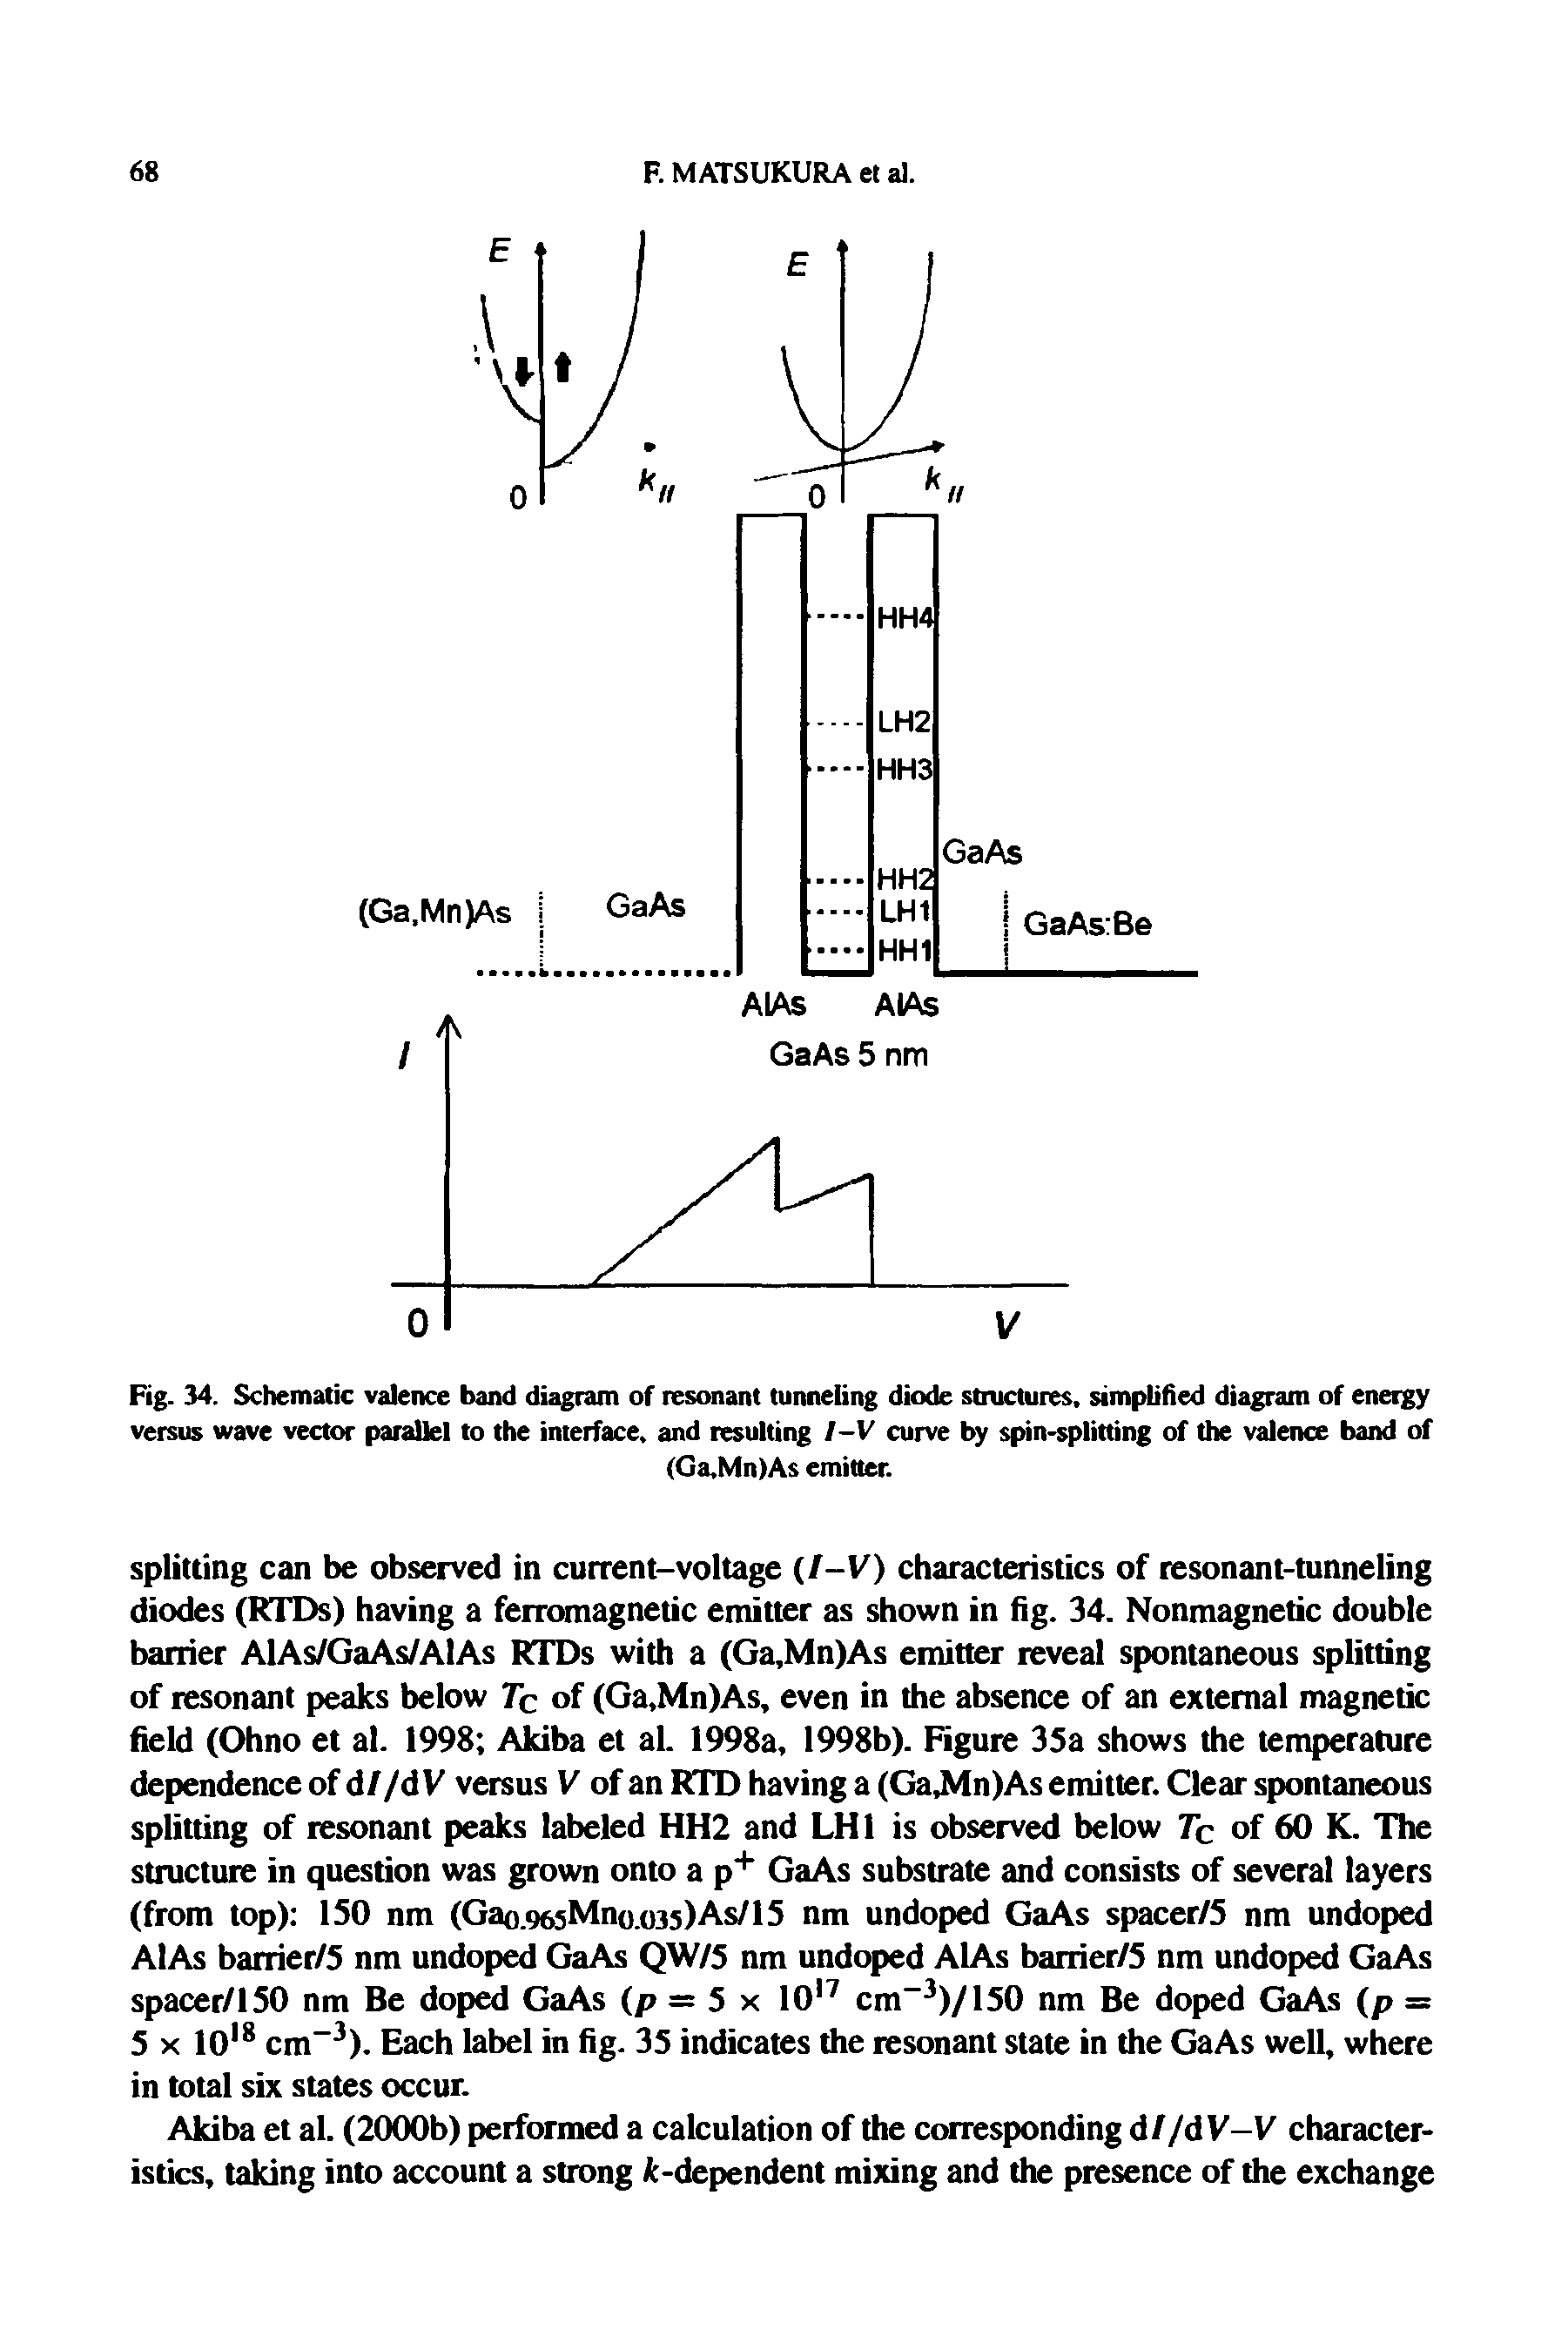 Fig. 34. Schematic valence band diagram of resonant tunneling diode structures, simplified diagram of energy versus wave vector parallel to the interface, and resulting /-V curve by spin-splitting of the valence band of...